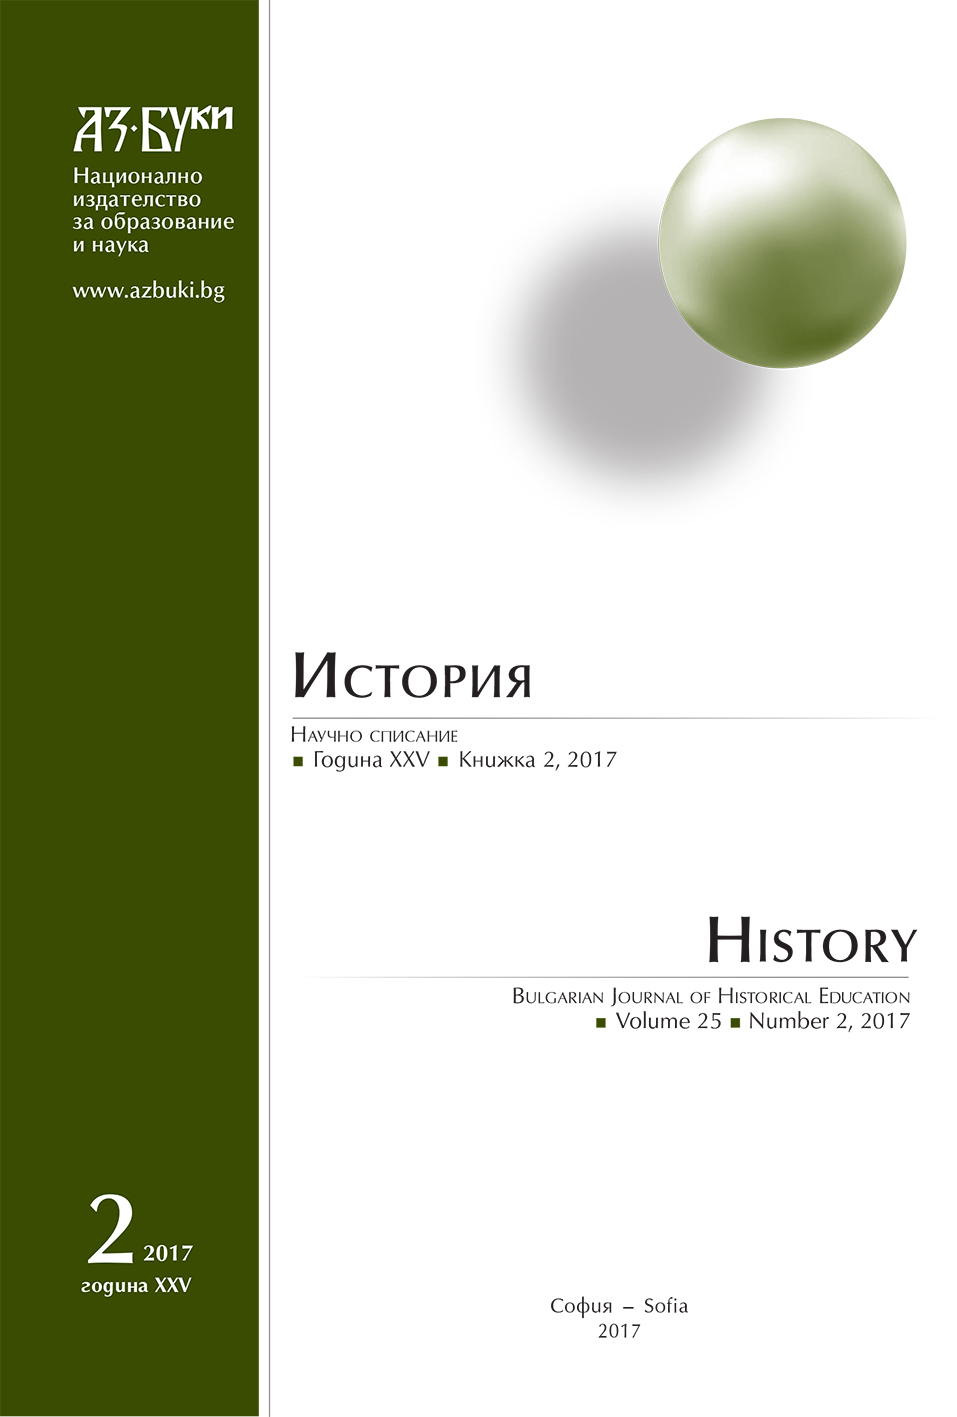 Karadzha Pasha Mosque in Gotse Delchev – Historiographical Narrative and Documentary Materials Cover Image